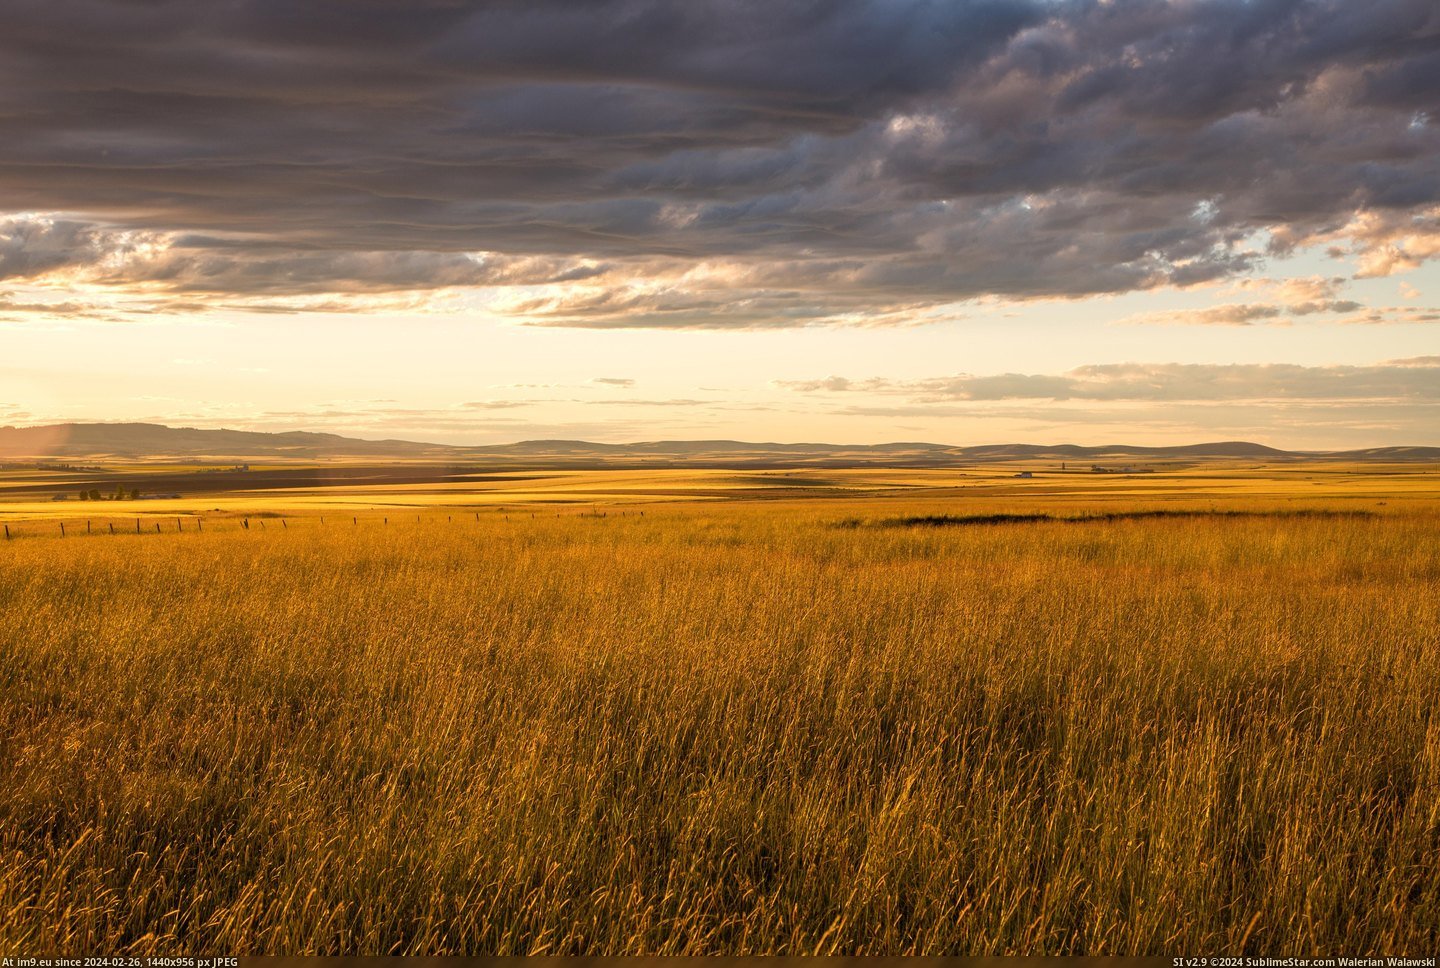 #Sunset #Golden #Wheat #Drenched #5000x3333 #Moscow #Fields [Earthporn] Wheat fields drenched in a golden sunset near Moscow, ID [OC][5000x3333] Pic. (Bild von album My r/EARTHPORN favs))